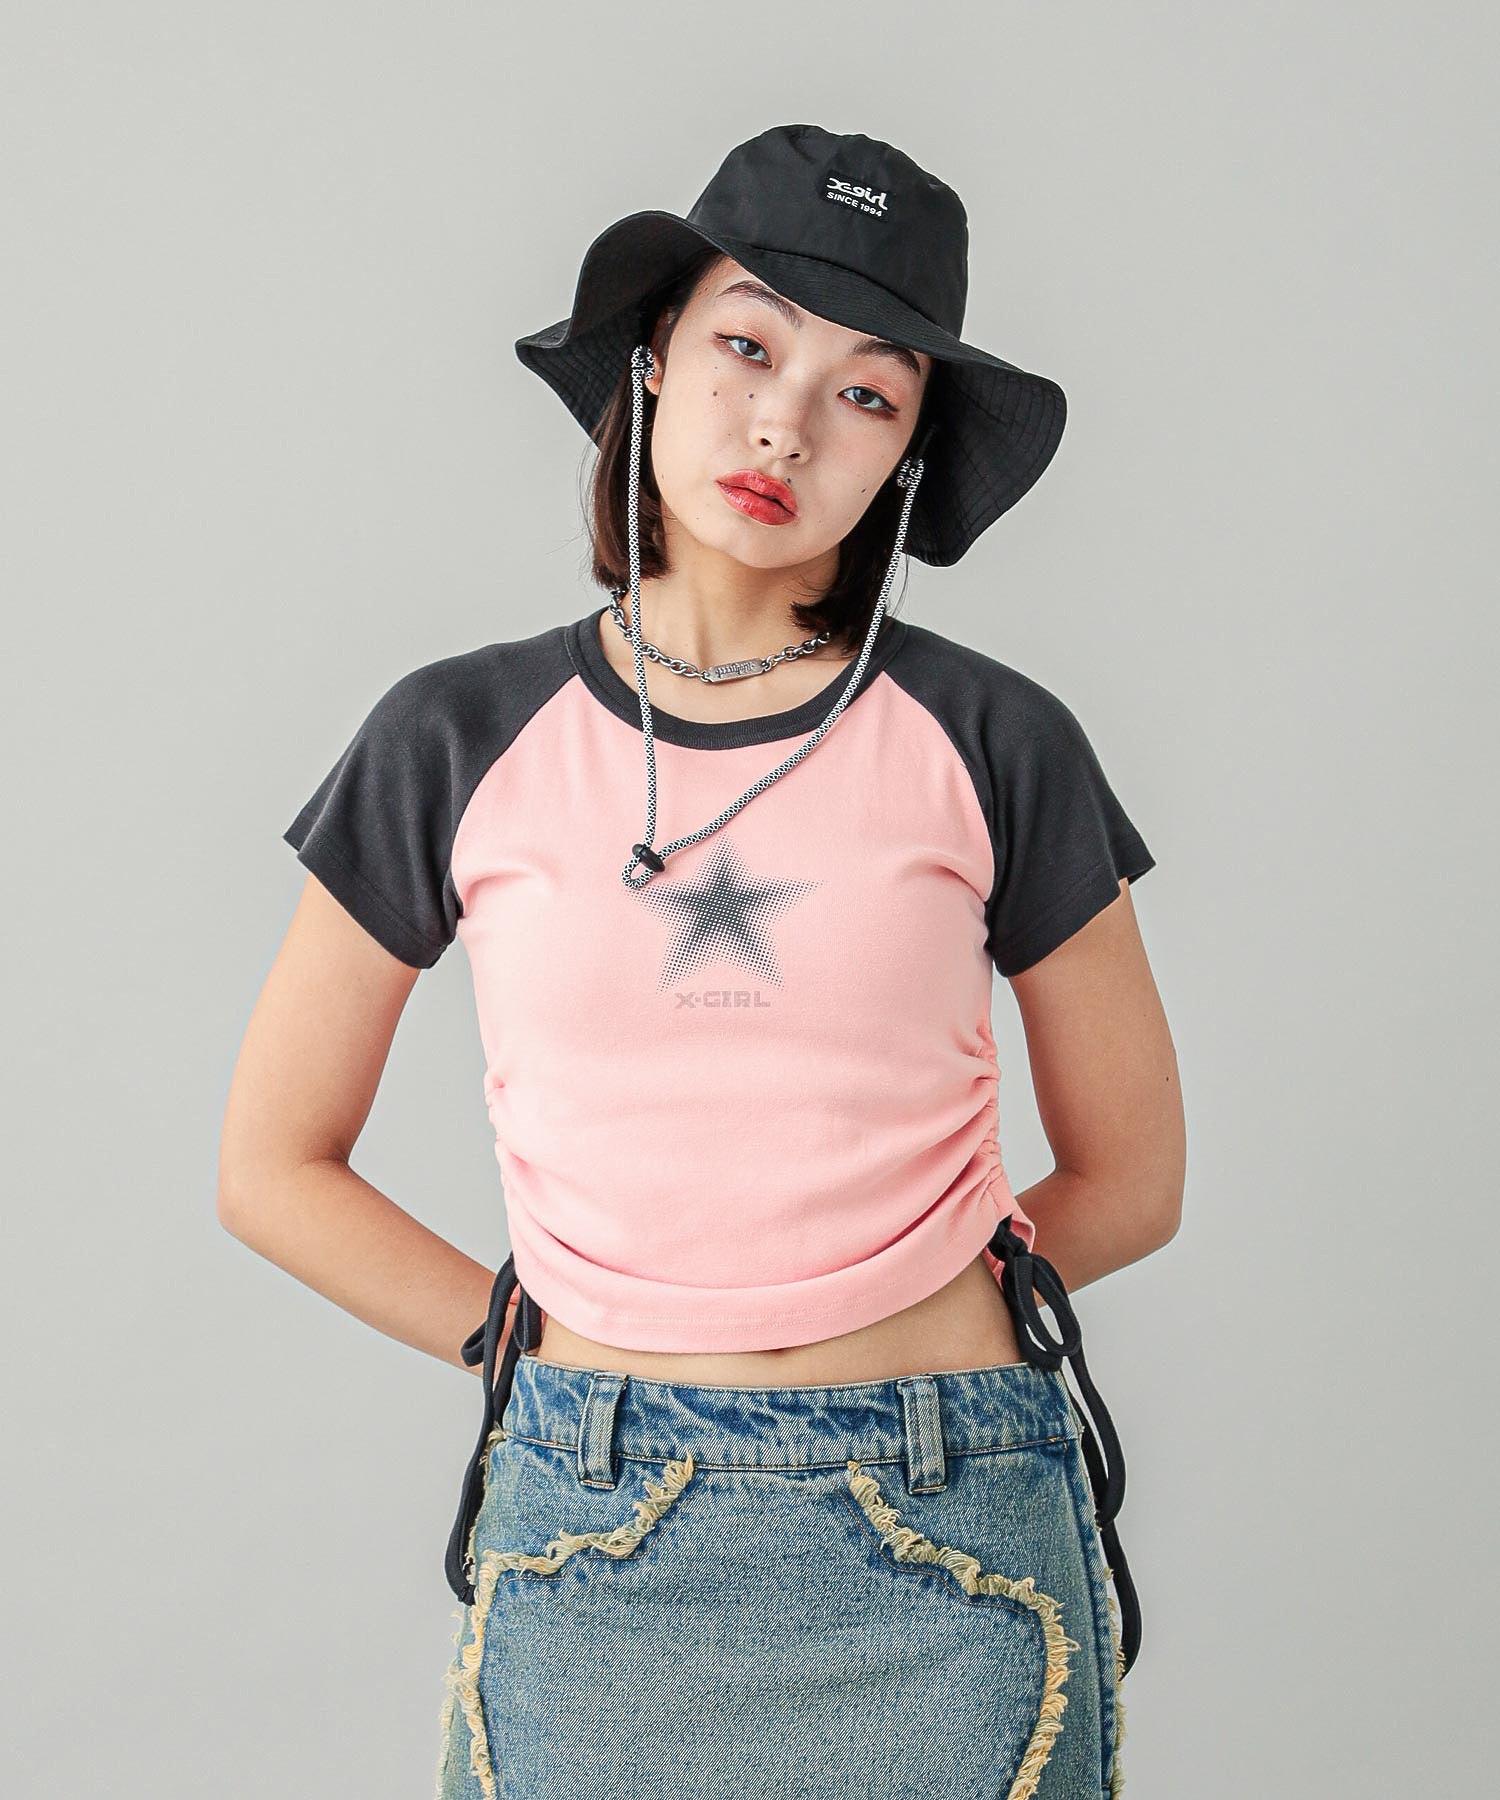 DOTTED STAR S/S RAGRAN BABY TOP